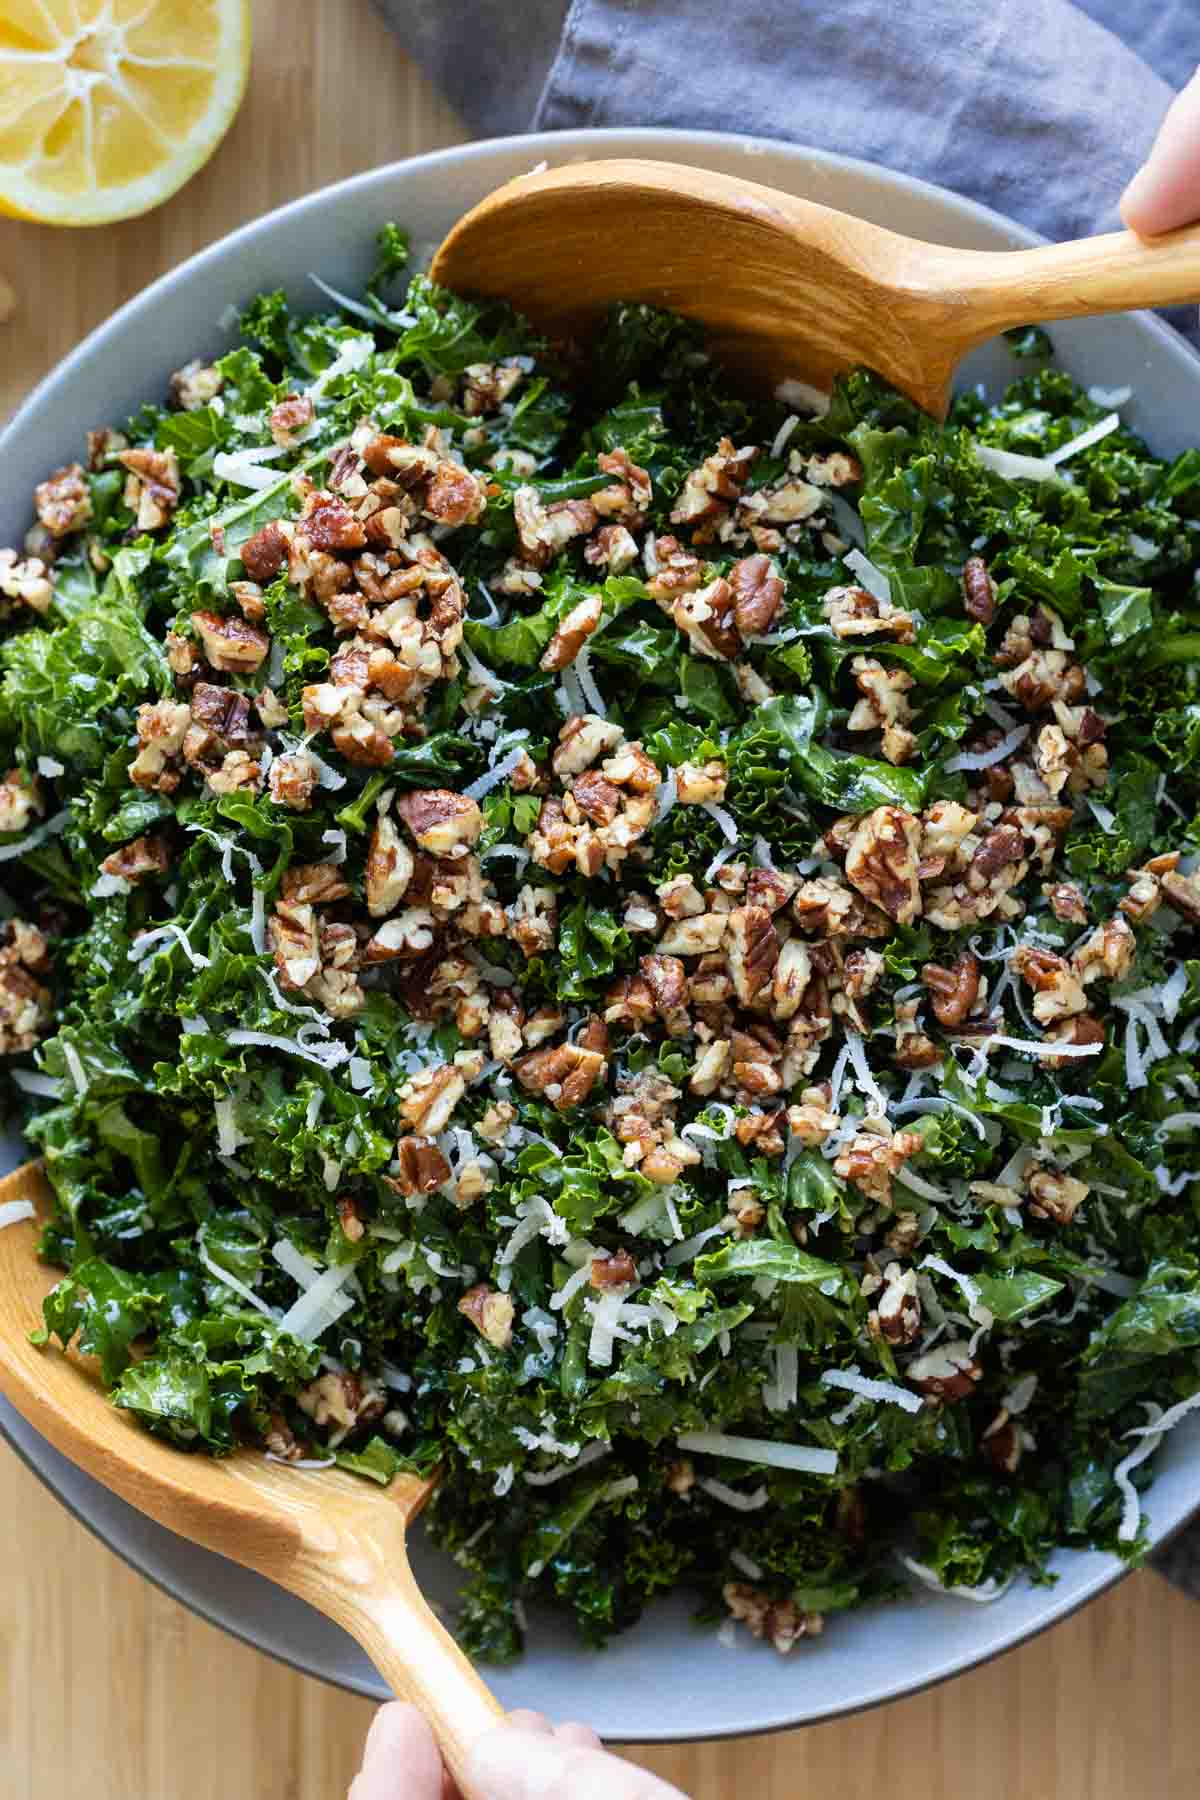 Kale Crunch Salad in a grey salad bowl with wooden spoons.